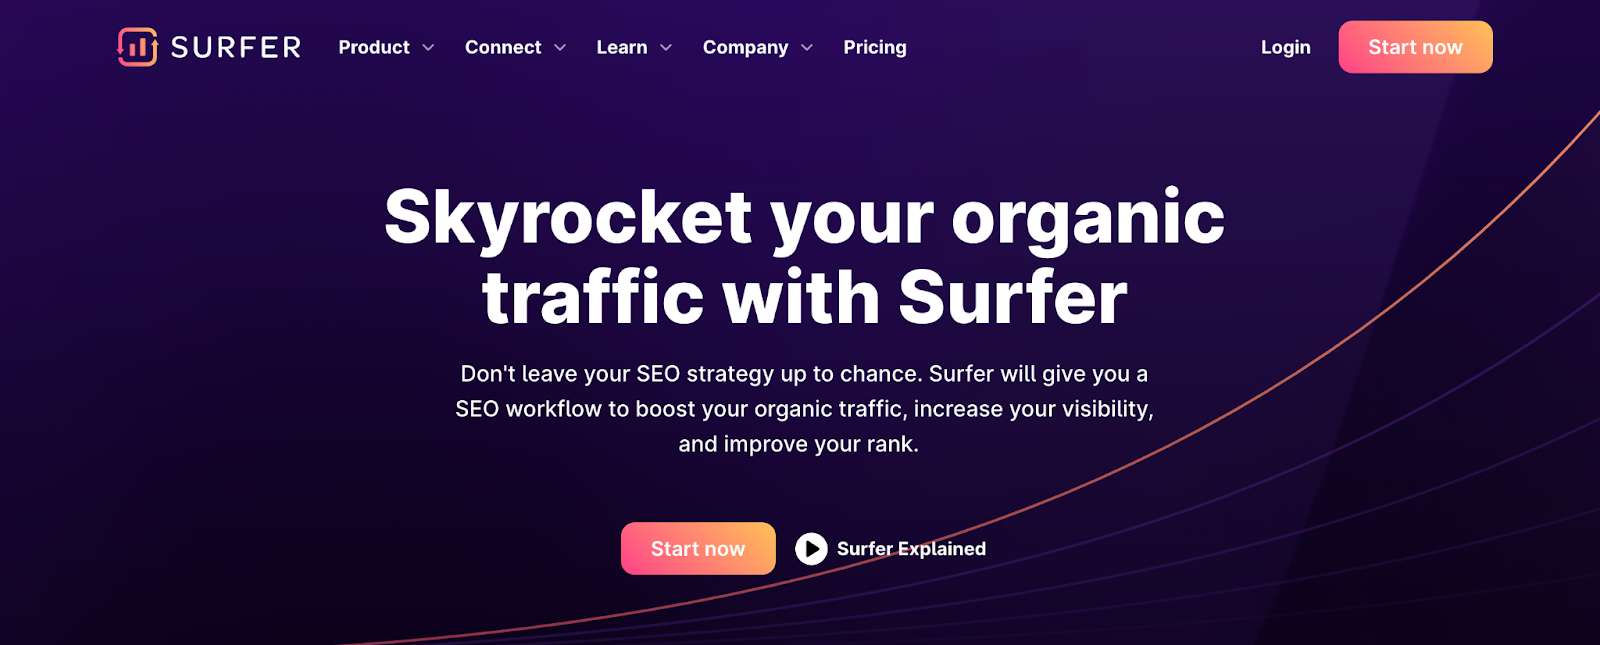 A screenshot of the Surfer SEO website, with the title “Skyrocket your organic traffic with Surfer.”